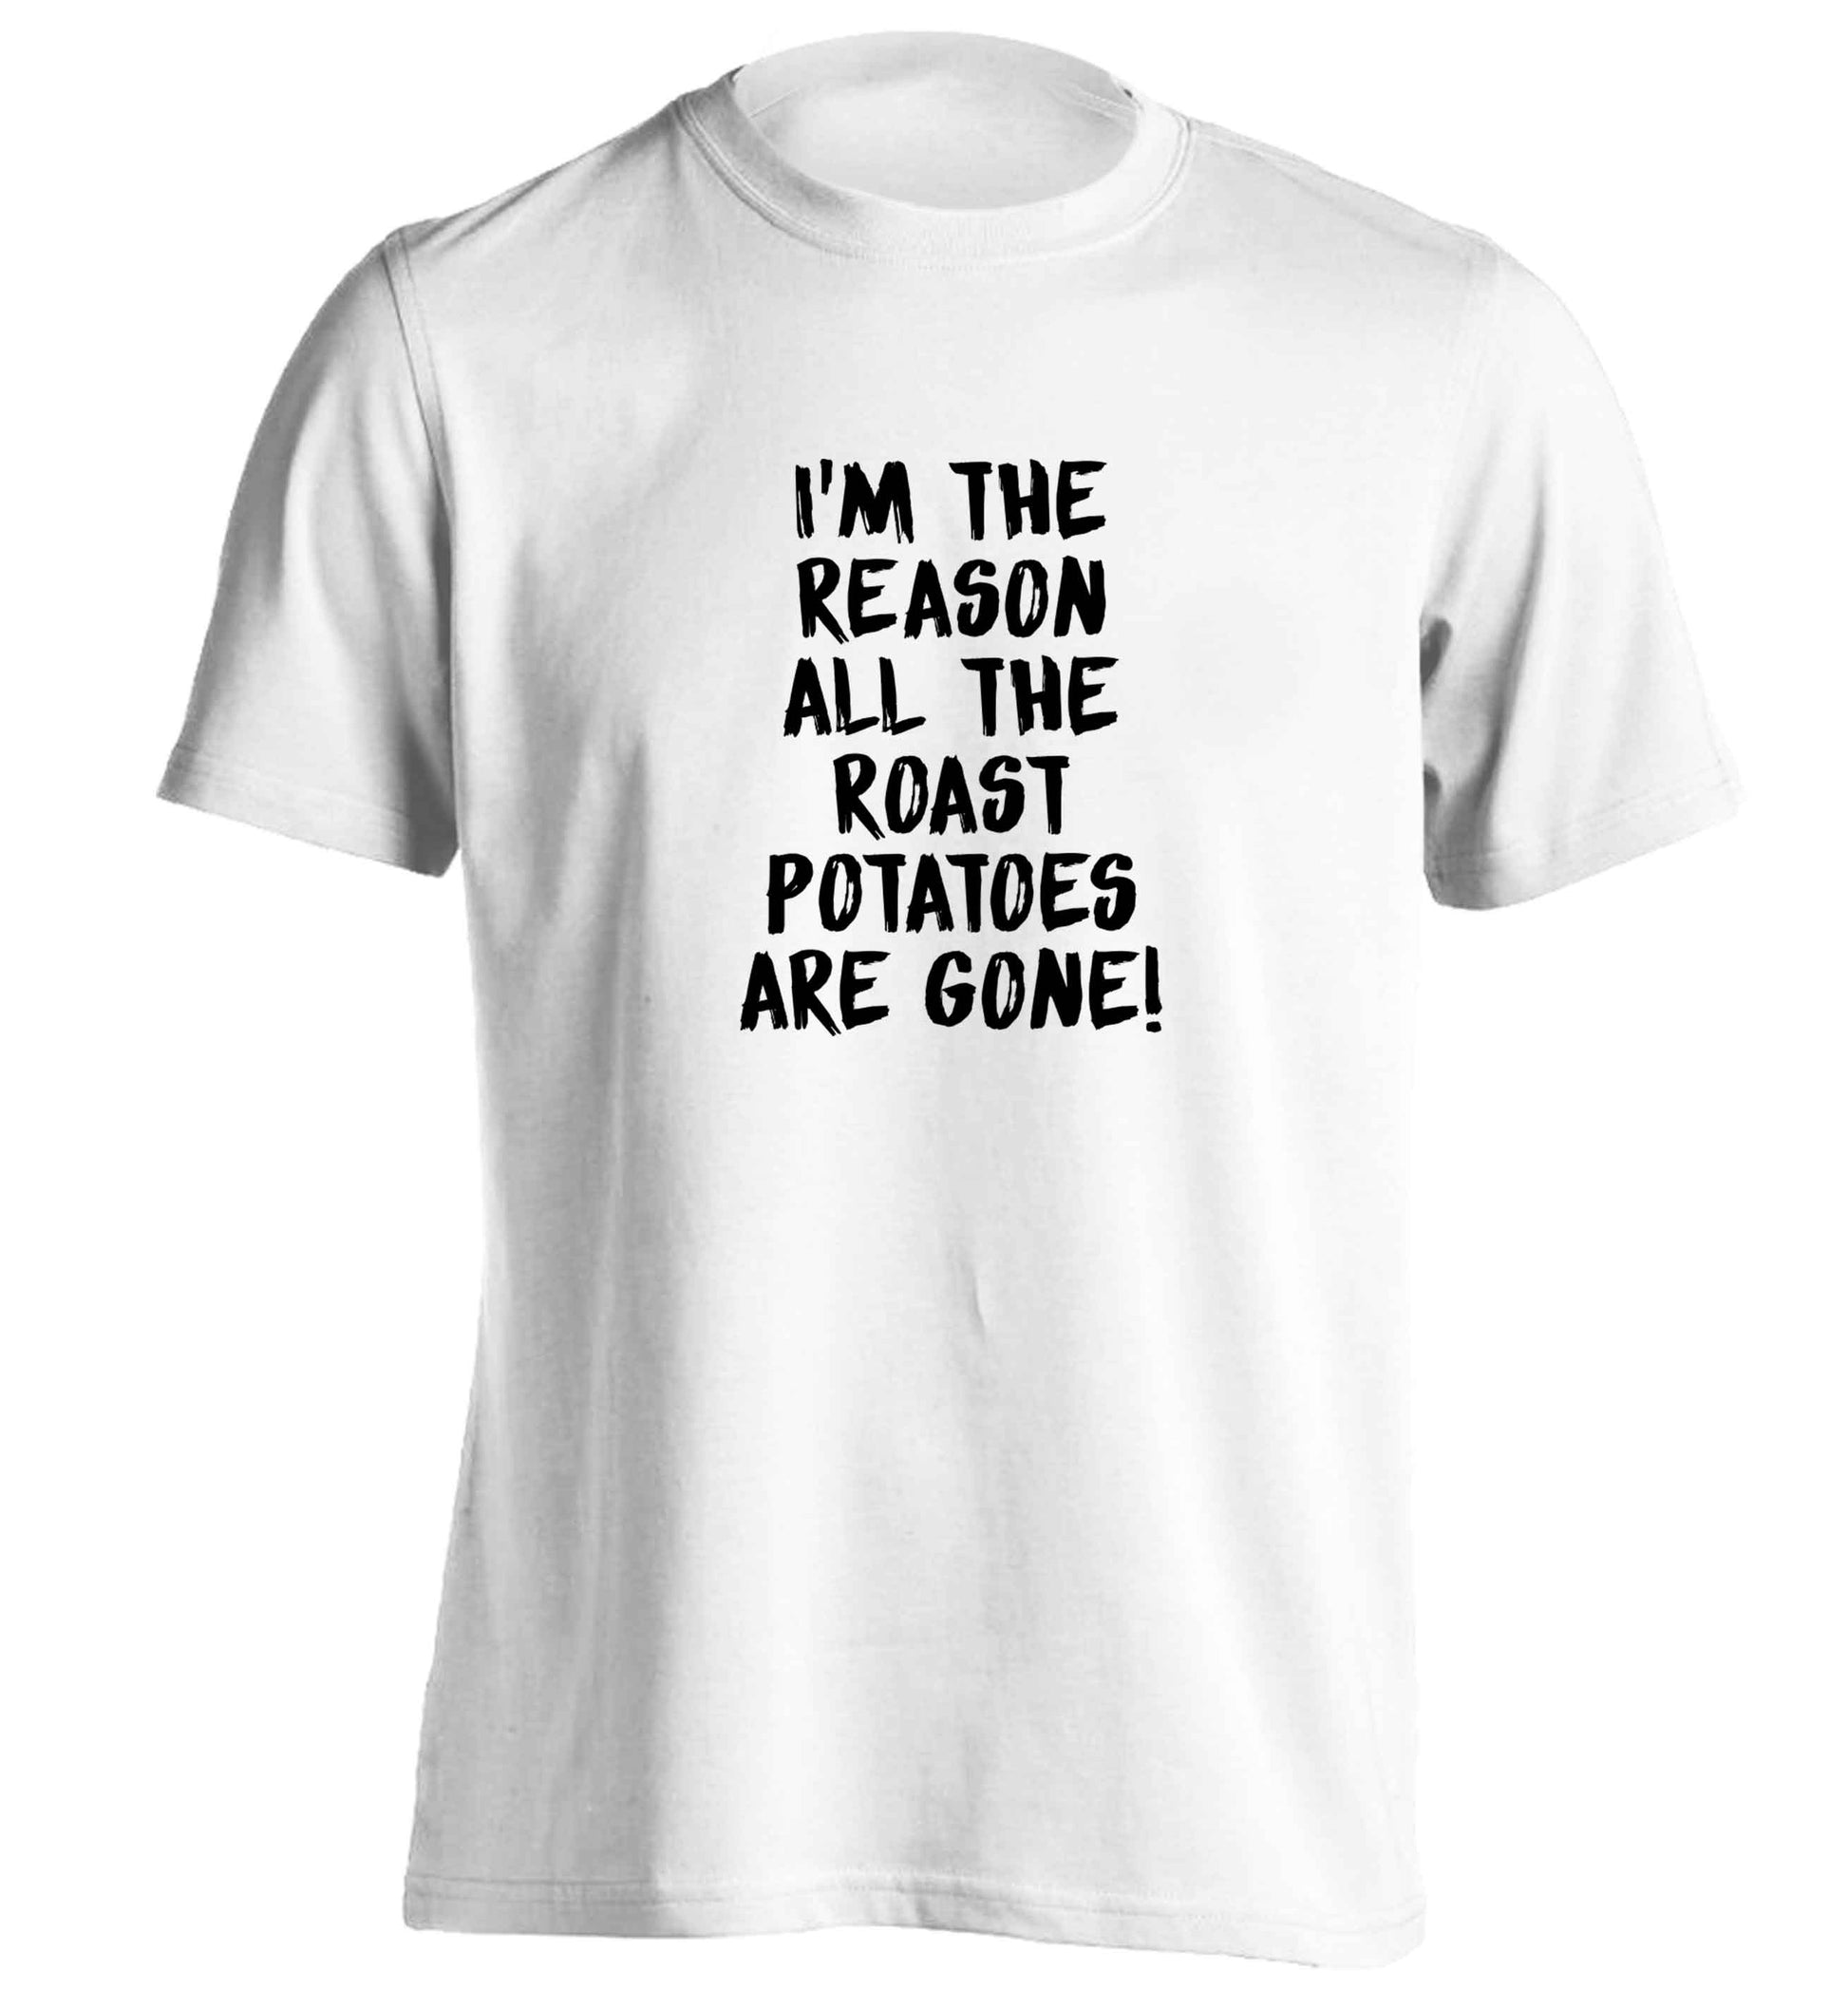 I'm the reason all the roast potatoes are gone adults unisex white Tshirt 2XL